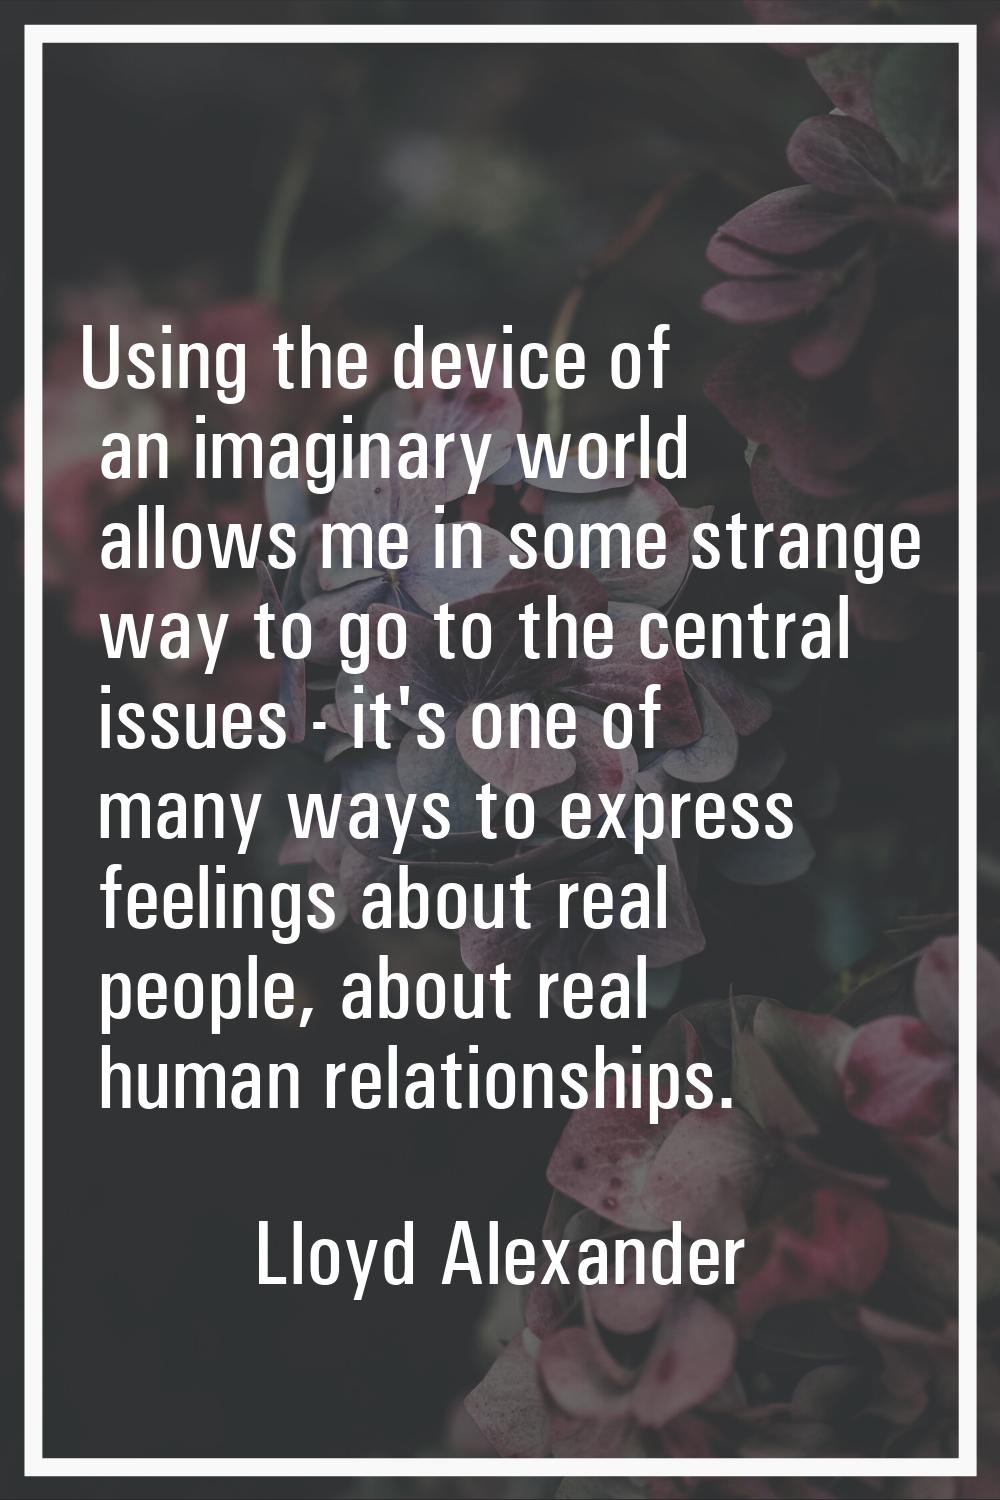 Using the device of an imaginary world allows me in some strange way to go to the central issues - 